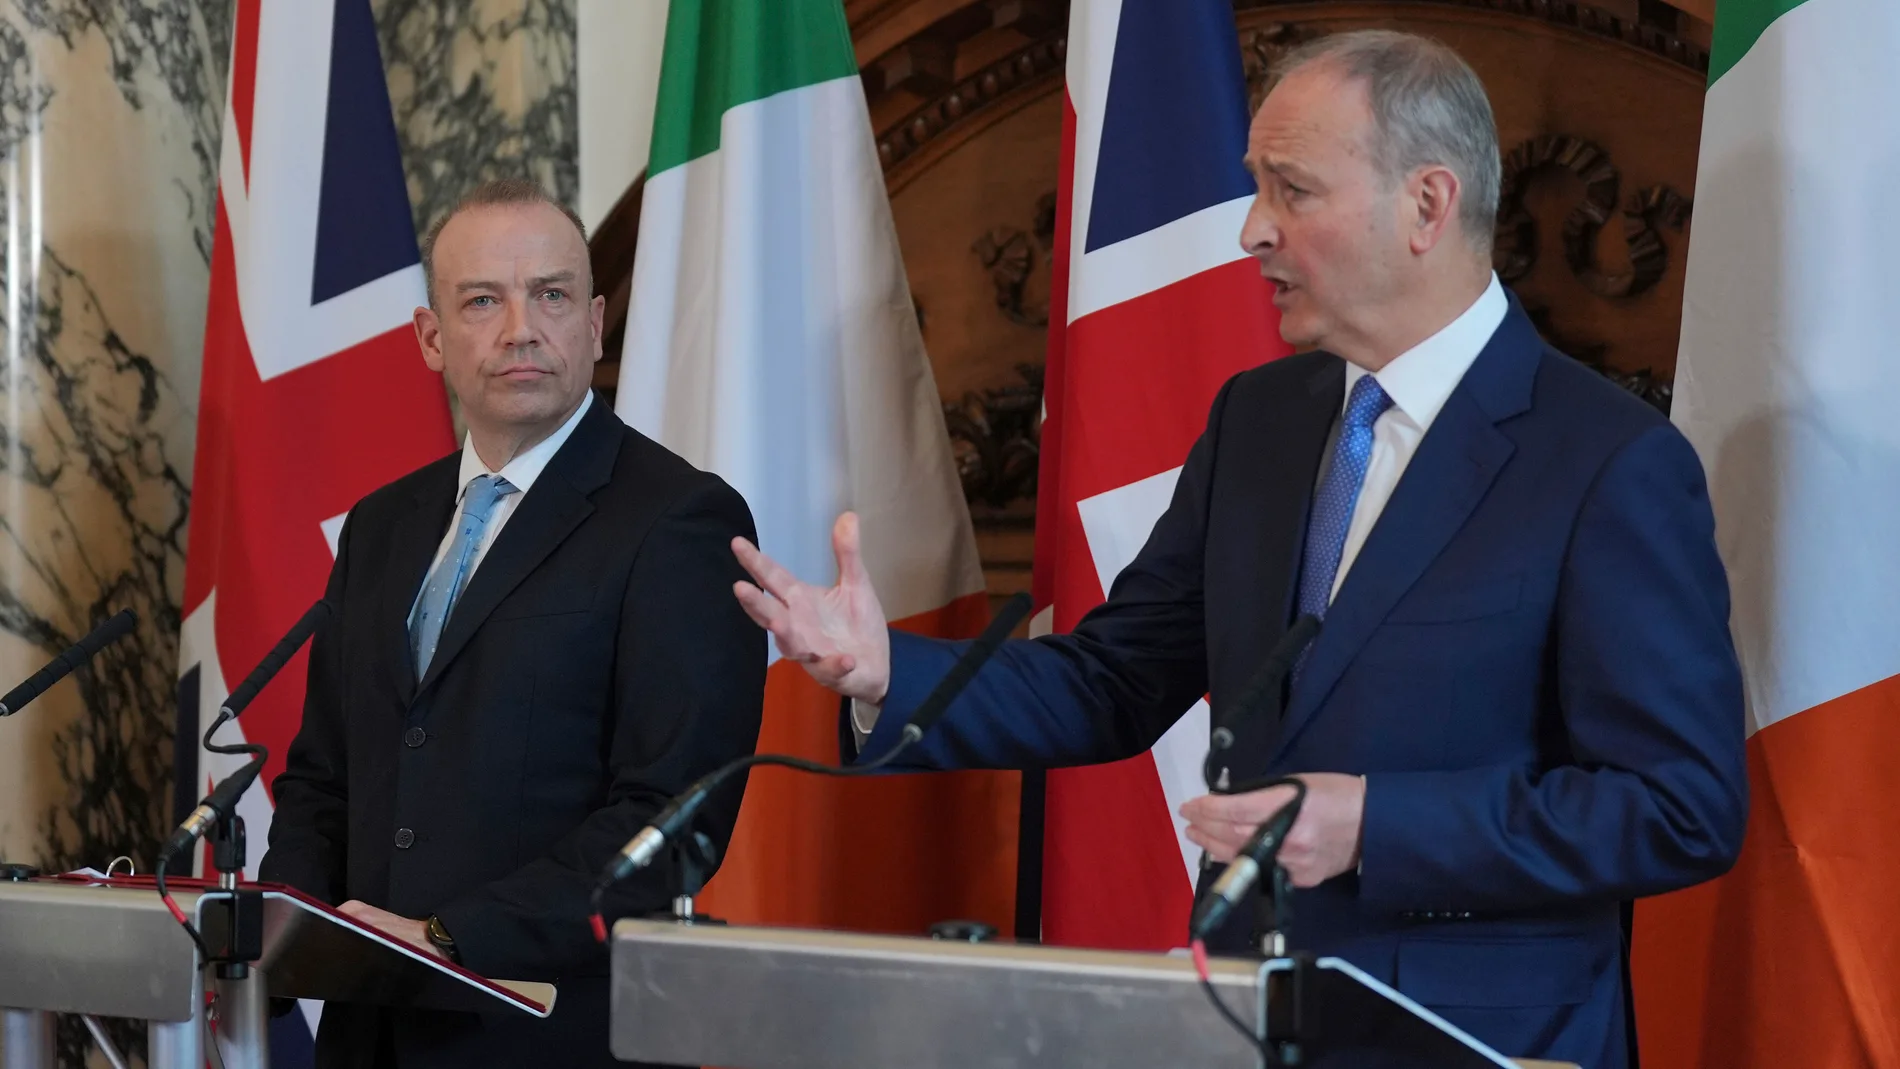 Northern Ireland Secretary Chris Heaton-Harris, left, and Tanaiste Micheal Martin hold a joint press conference during the British-Irish intergovernmental conference at 100 Parliament Street in London, Monday April 29, 2024. Established under Strand 3 of the Belfast (Good Friday) Agreement, the British-Irish Intergovernmental Conference is a bilateral forum, aiming to take place three times per year, to bring together the British and Irish Governments to promote cooperation at all levels on a...